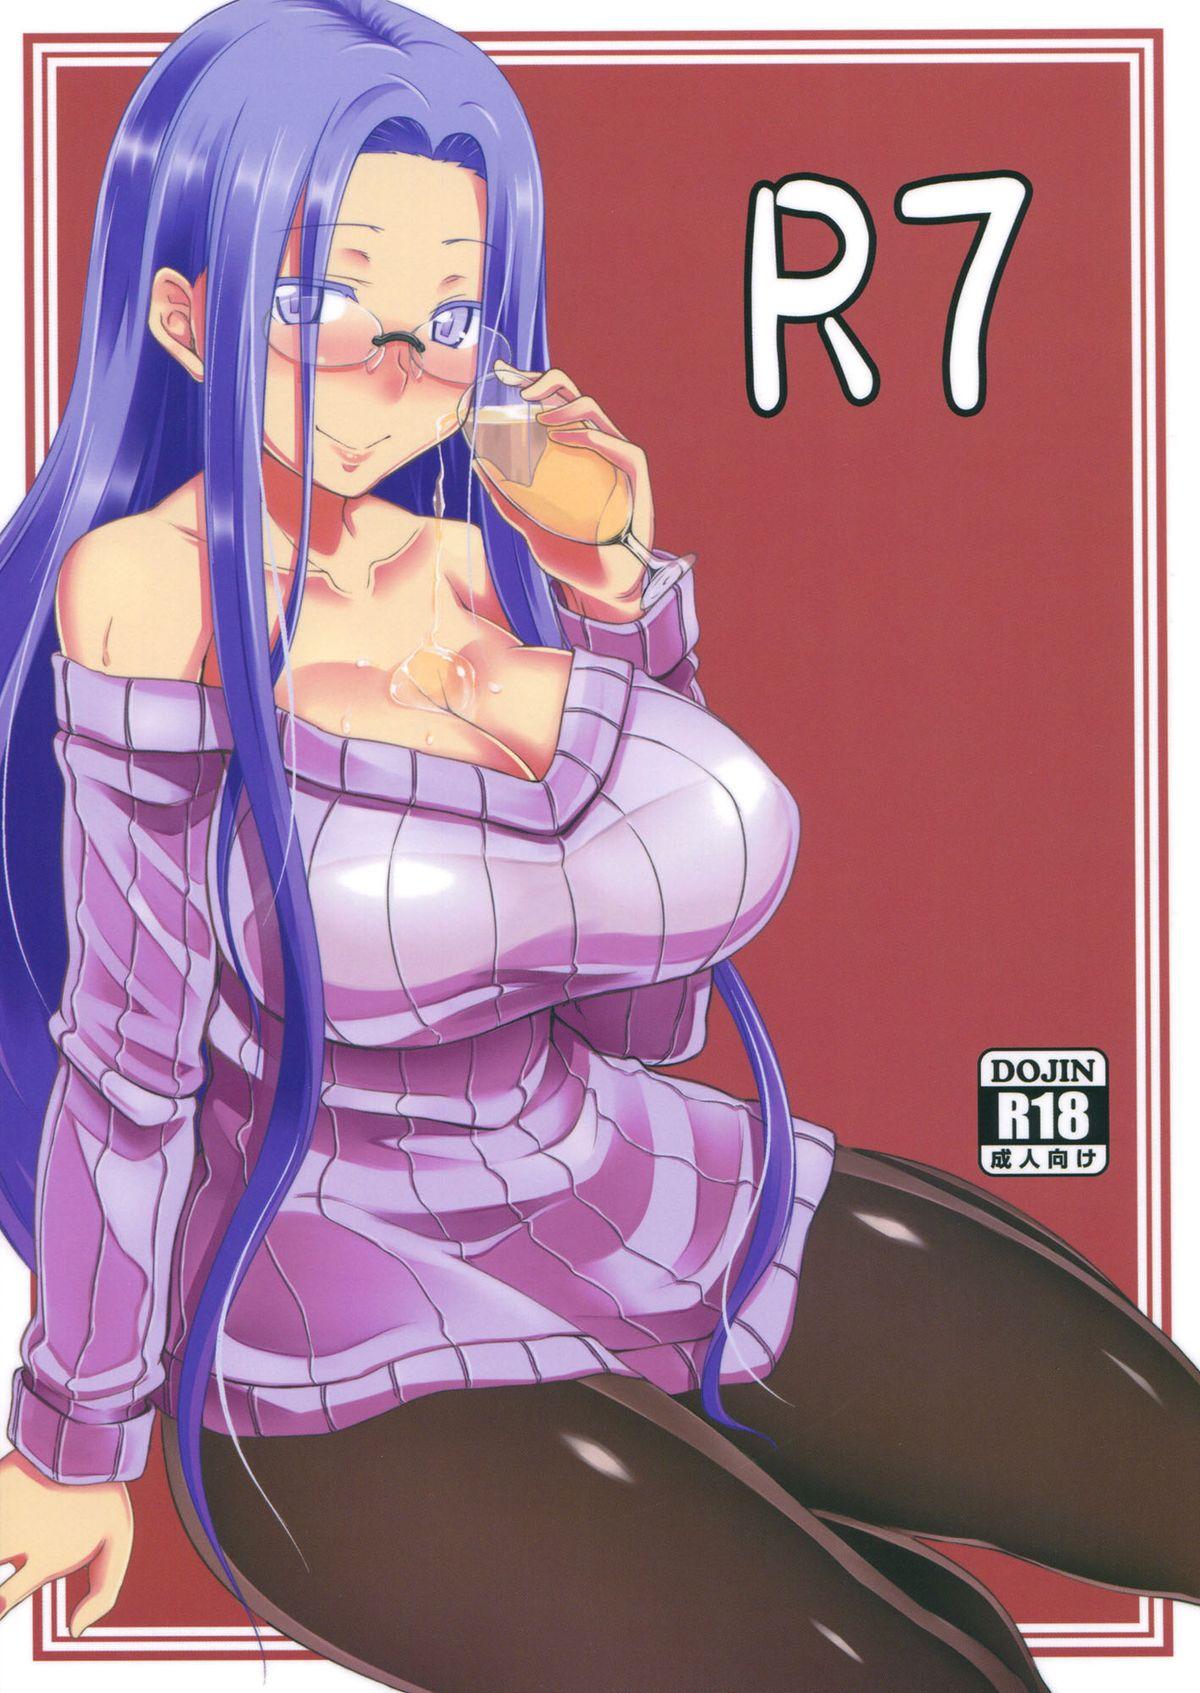 Audition R7 - Fate stay night Fate hollow ataraxia Spank - Page 1